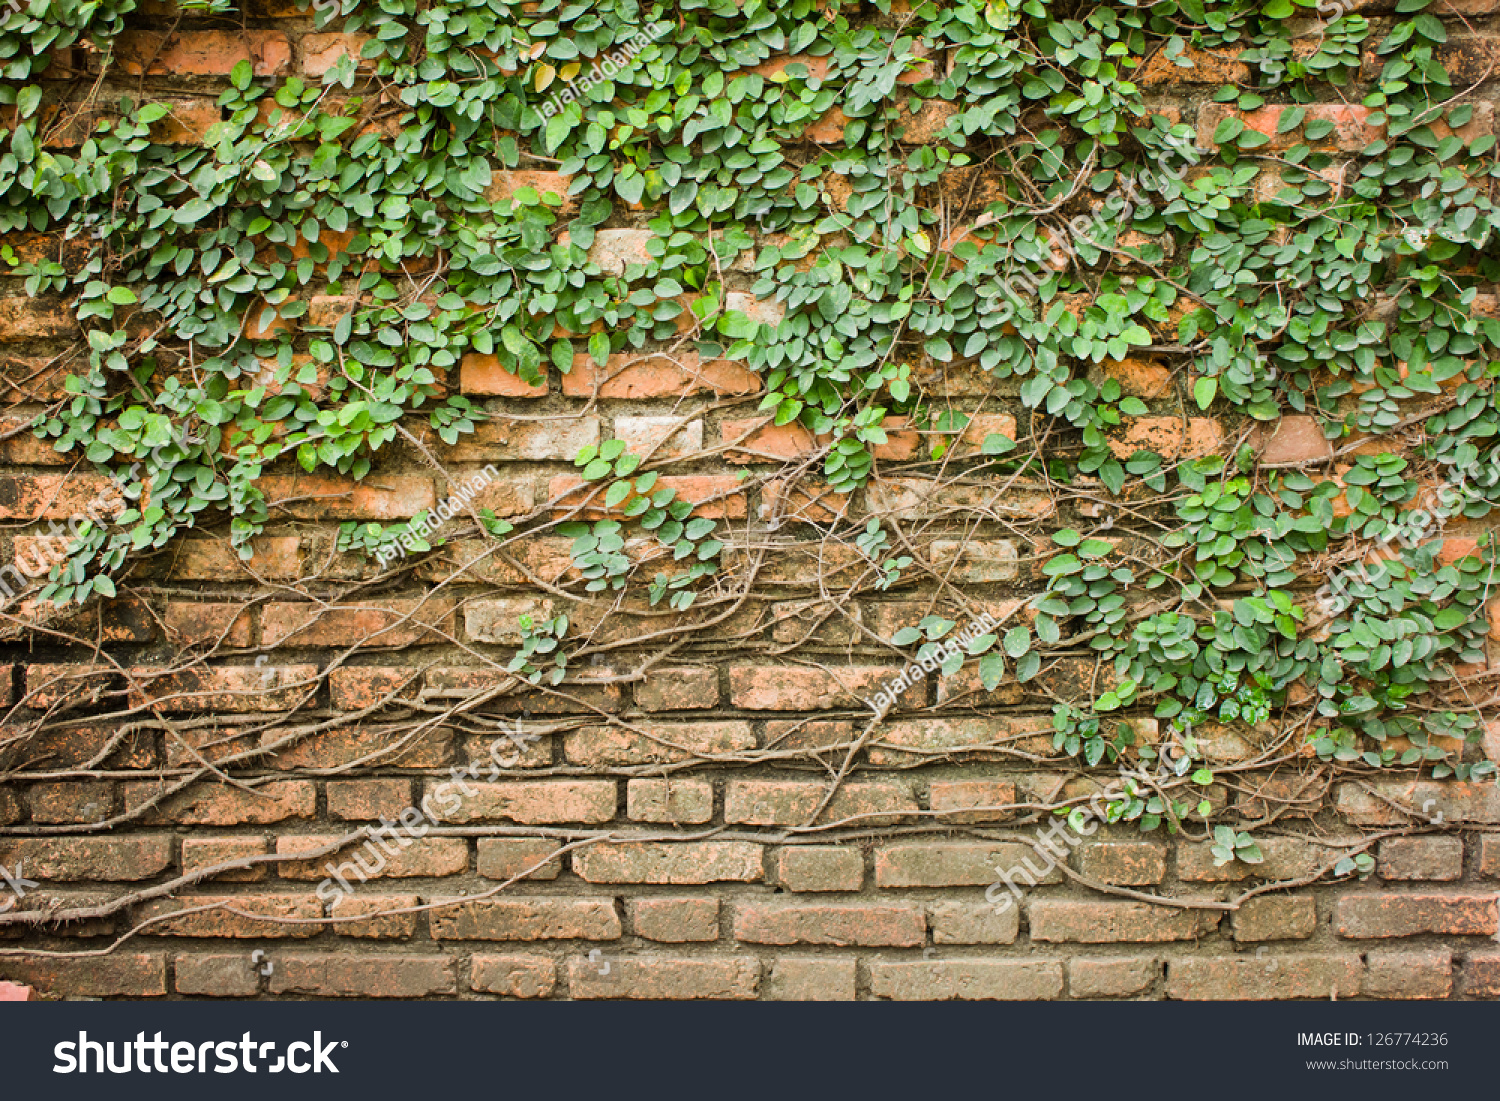 Creeper Climbing On Dirty Old Brick Wall Background Stock Photo ...